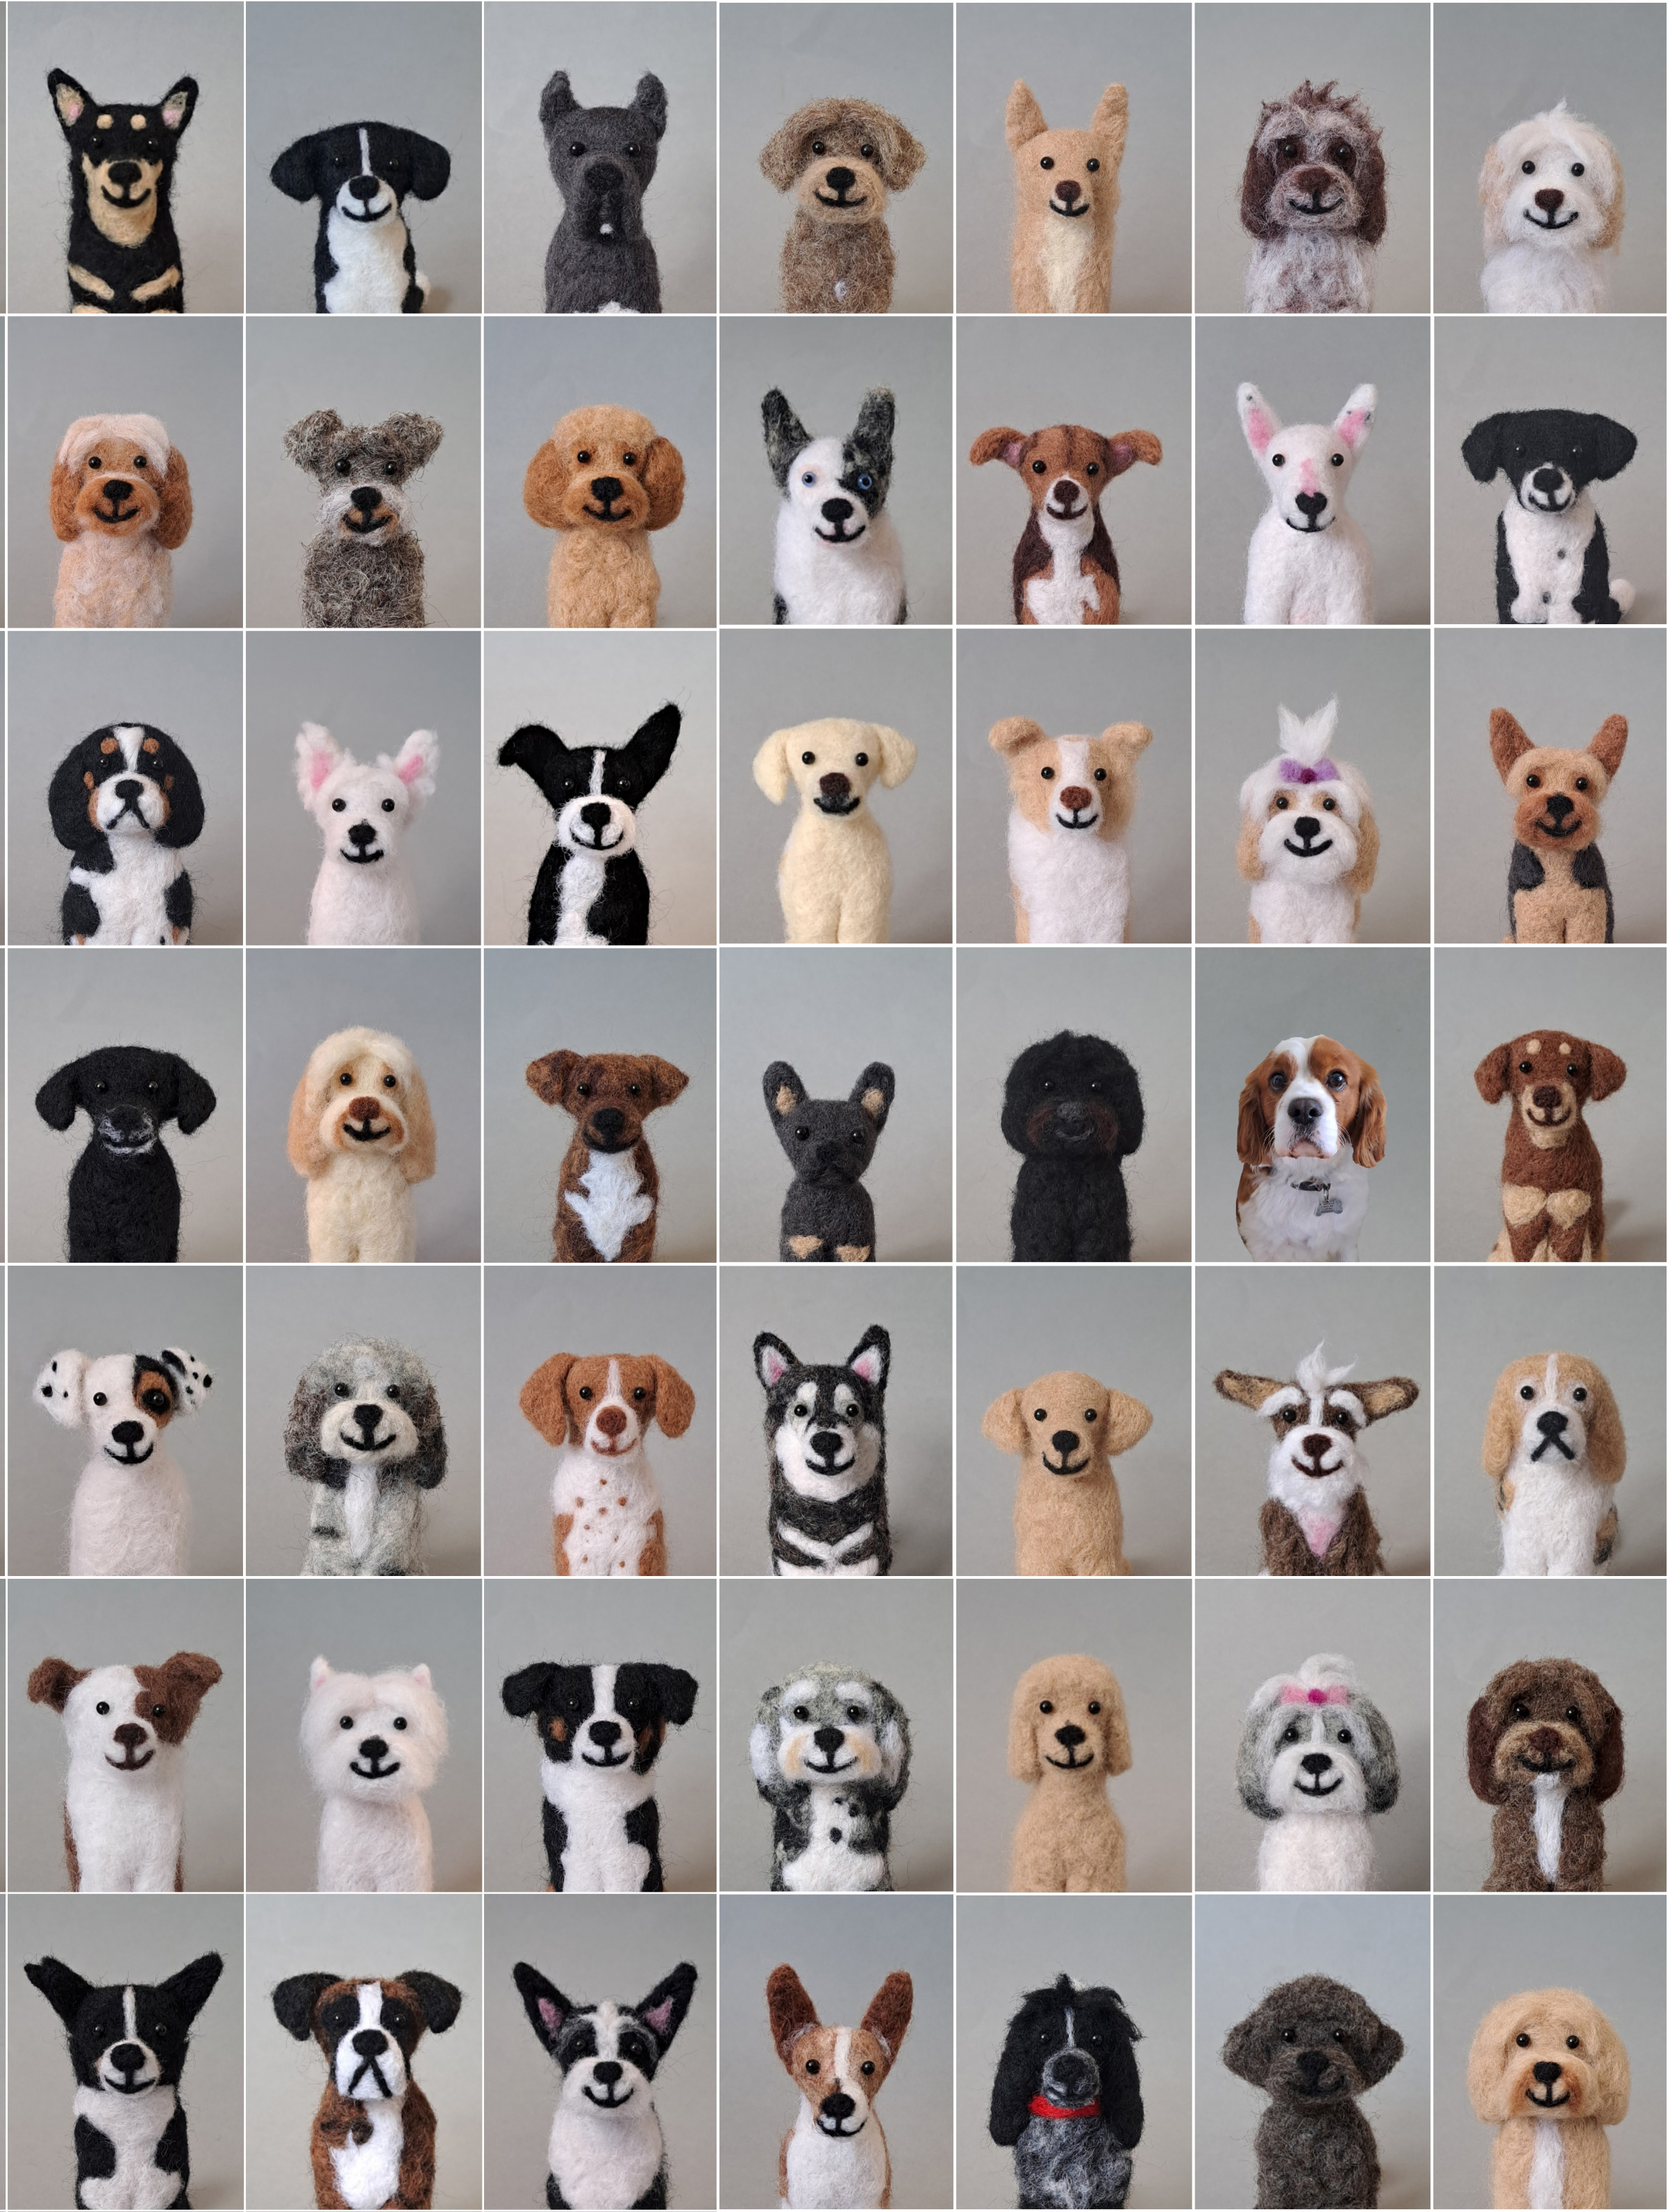 Optical illusion: find the real dog among the 49 canines shown here